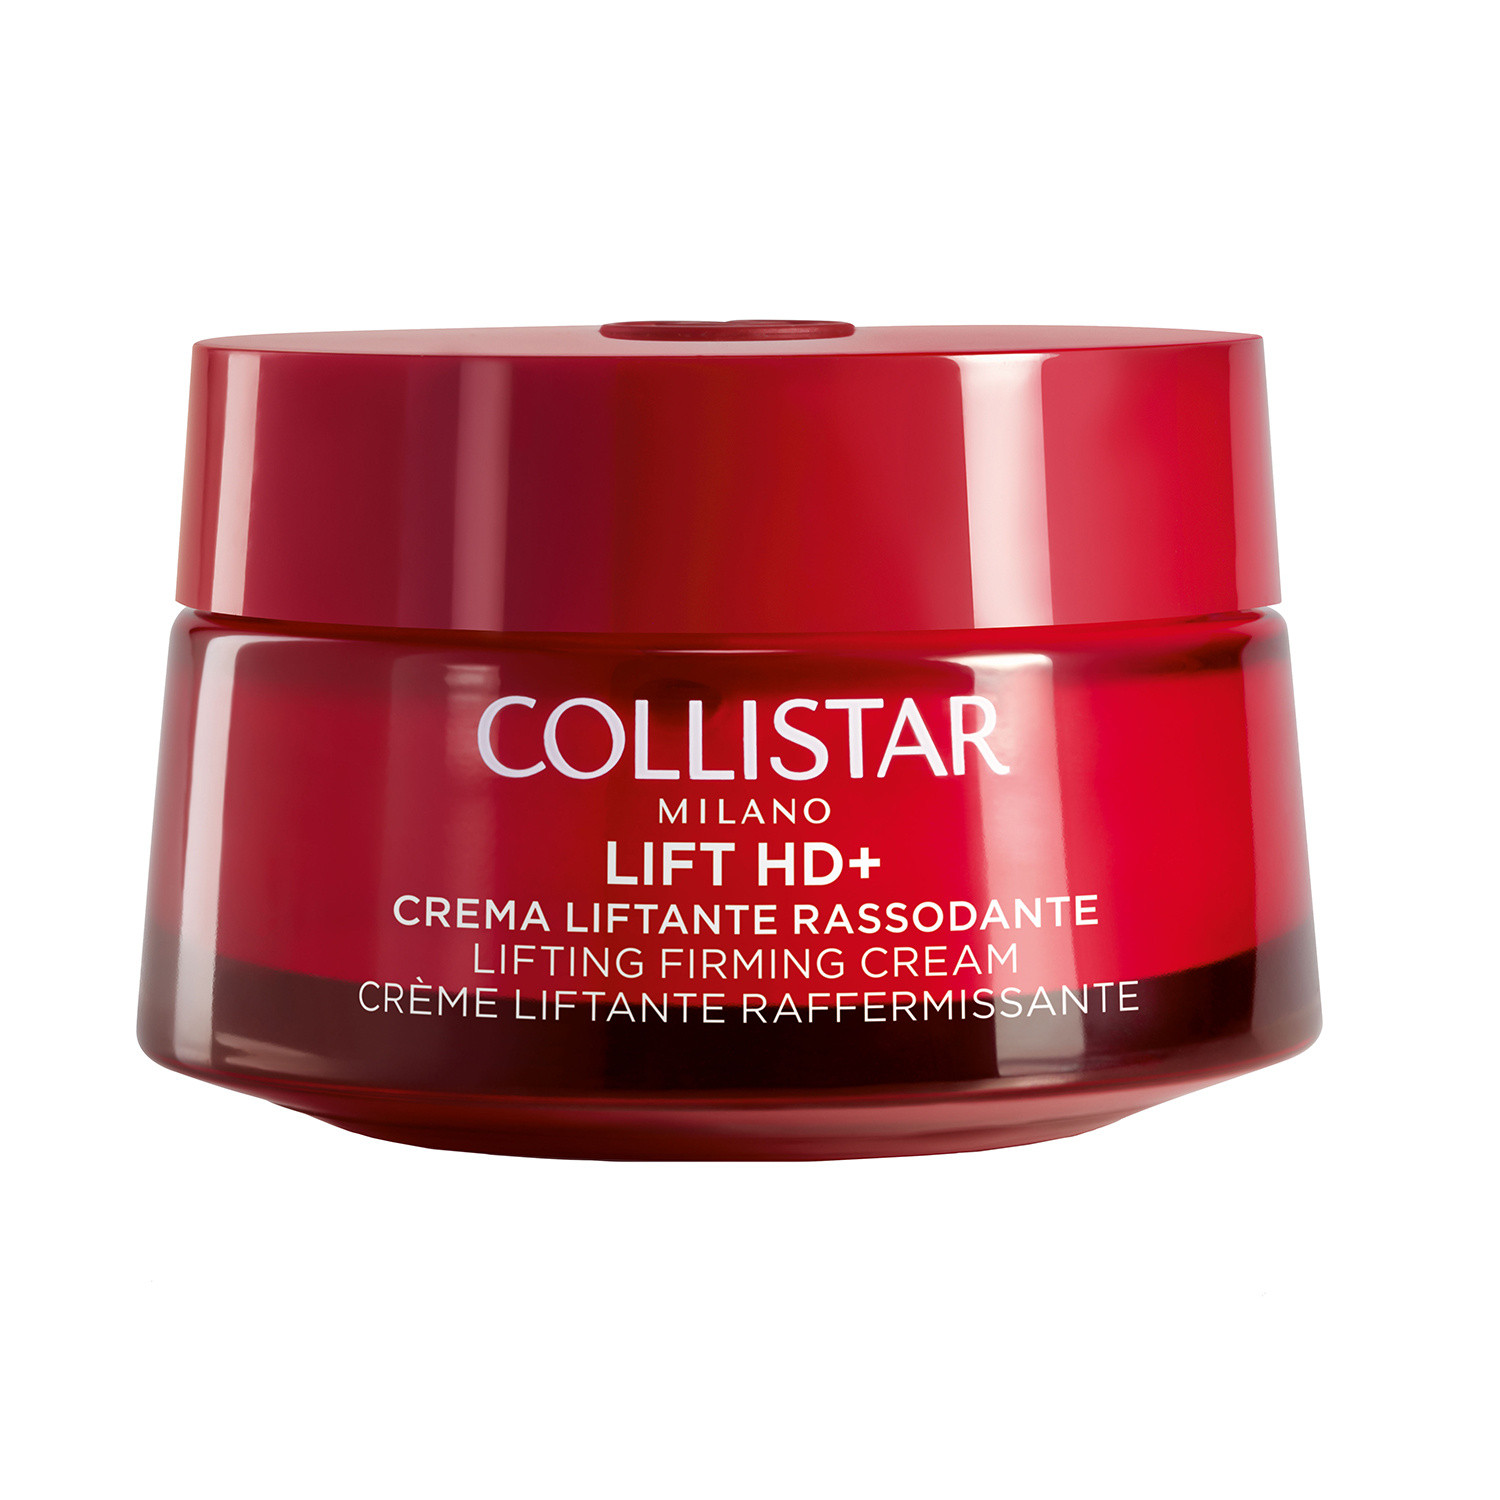 Collistar - Lift hd + face and neck firming lifting cream 50 ml, White, large image number 0